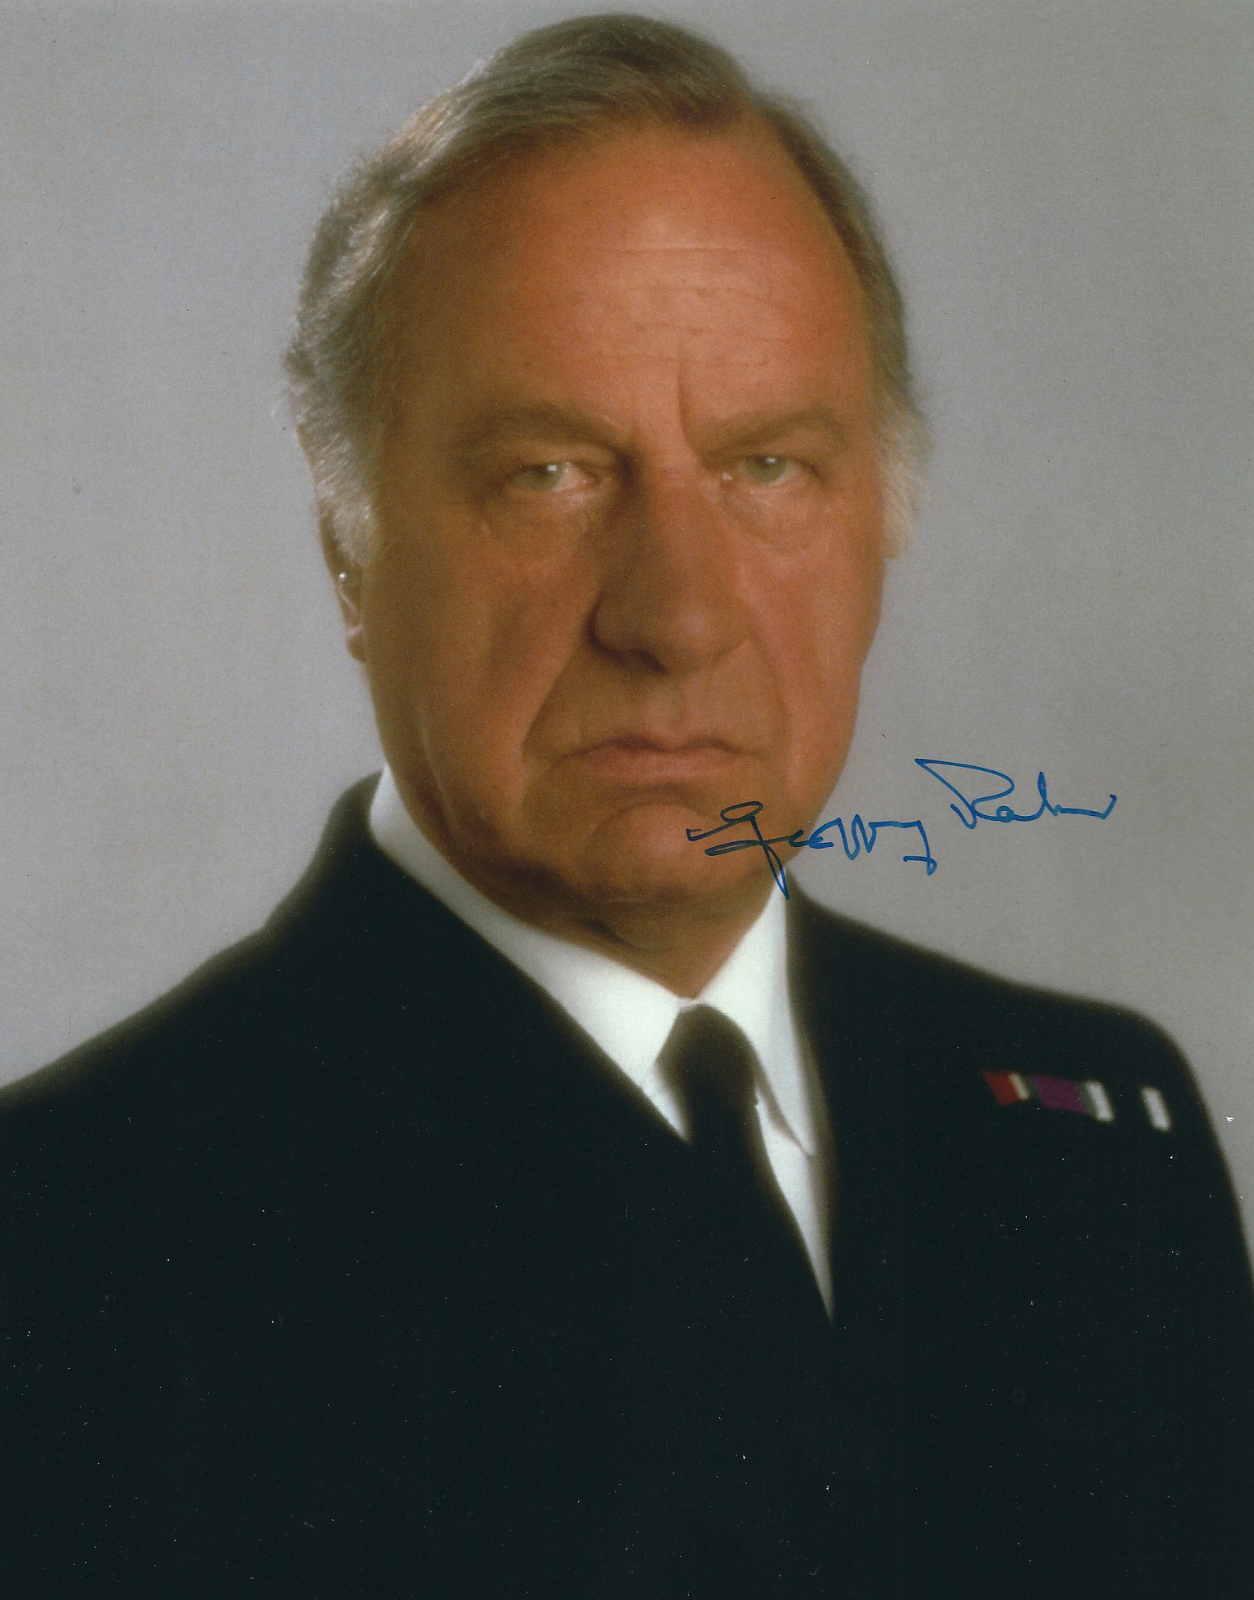 GEOFFREY PALMER SIGNED 8x10 JAMES BOND TOMORROW NEVER DIES Photo Poster painting UACC AUTOGRAPH